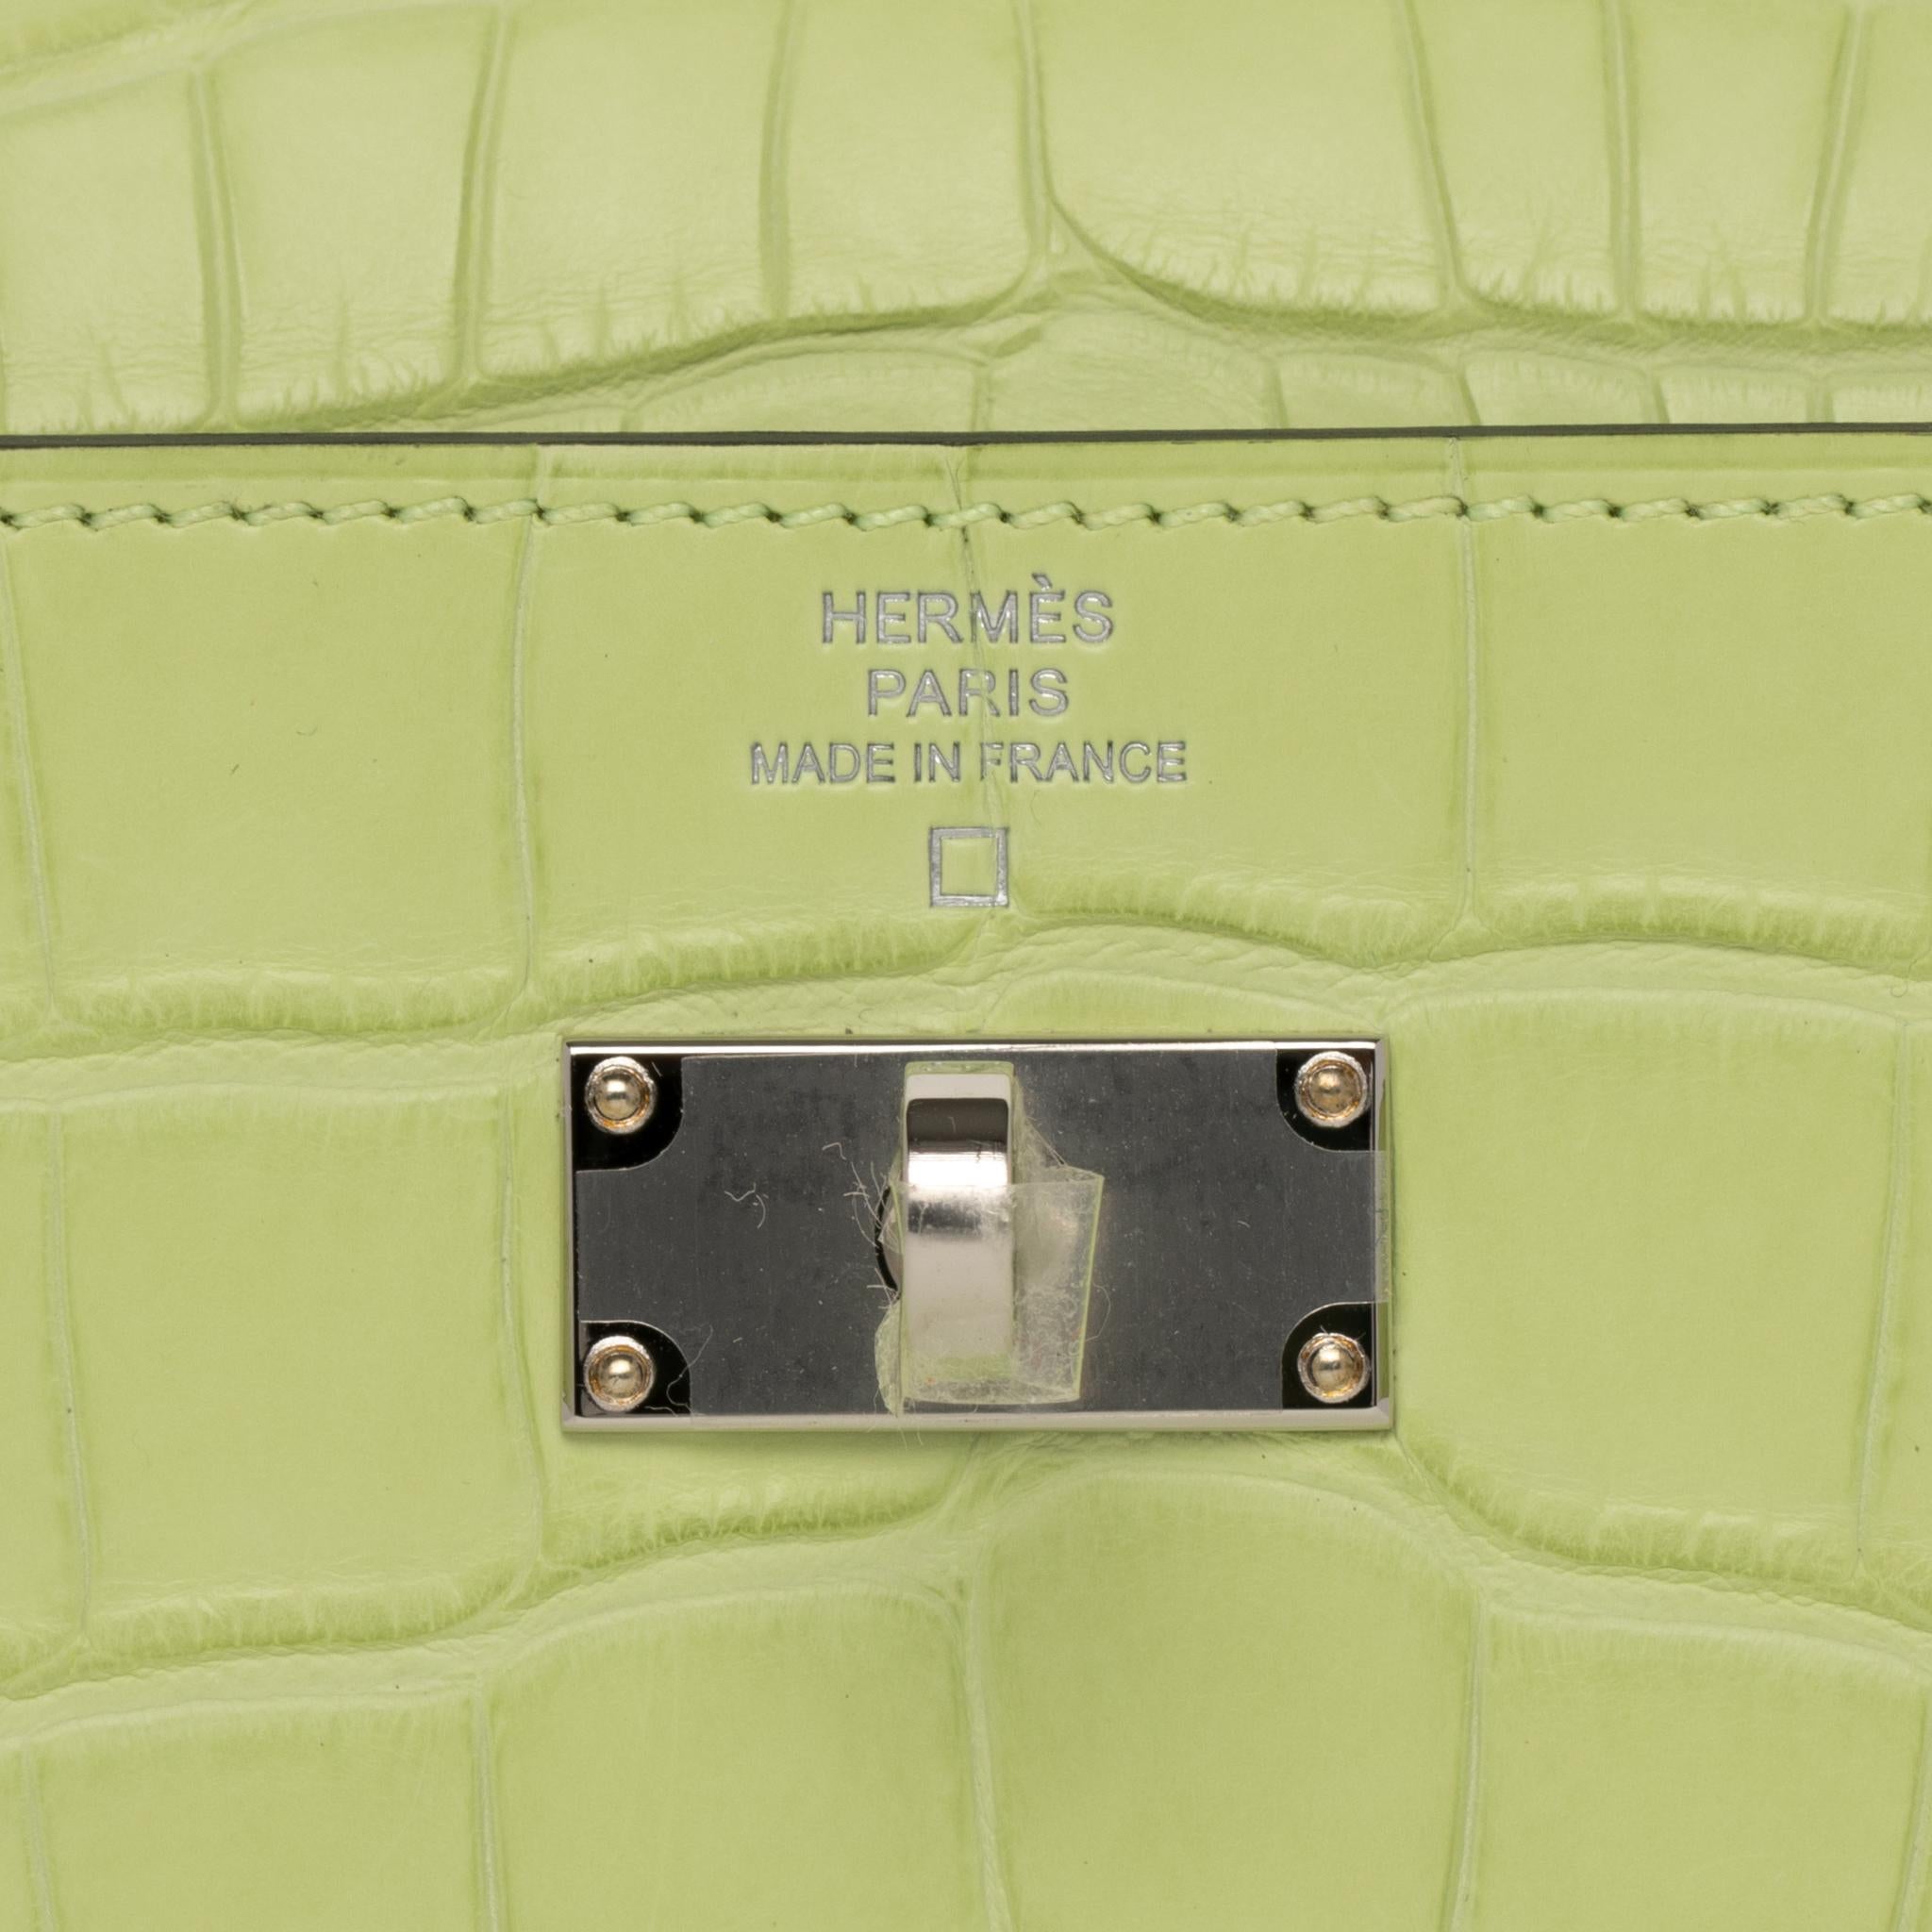 Brand: Hermès 
Style: Kelly To Go Wallet 
Size: 19.7 L x 11.5 H x 1.5 D cm
Color: Jaune Bourgeon
Leather: Matte Alligator
Hardware: Palladium
Stamp: 2020 Y
Other: Removable shoulder strap, 4 credit card slots, zipped change purse and palladium